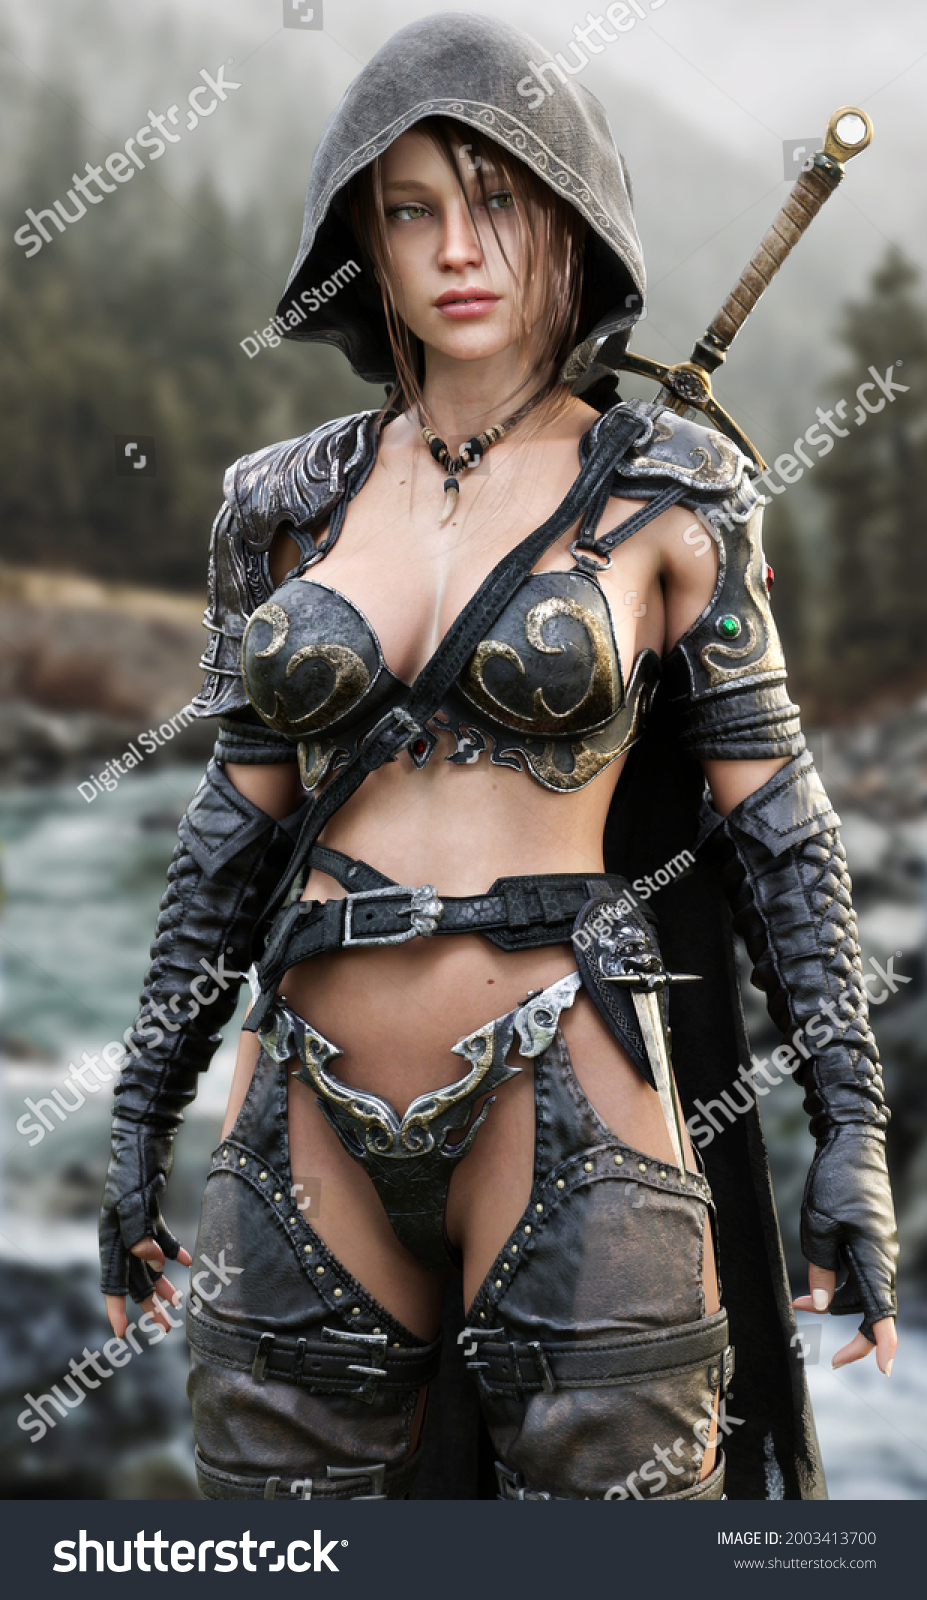 stock-photo-portrait-of-a-fantasy-female-ranger-pathfinder-patrolling-her-home-land-wearing-leather-armor-2003413700.jpg